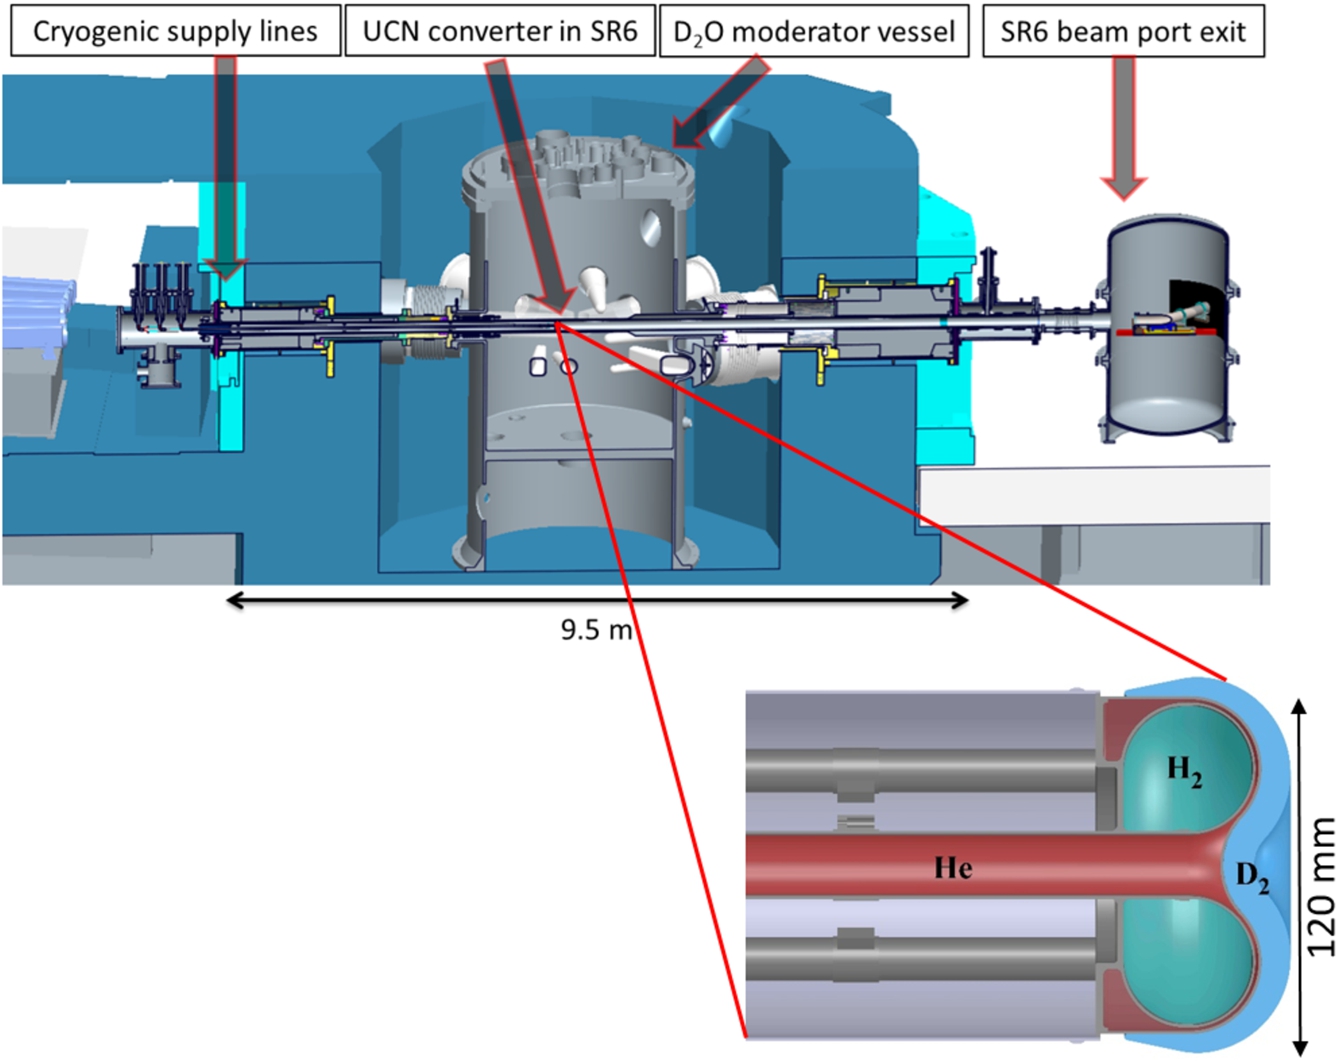 Top: vertical cut view of the heavy water vessel and the surrounding concrete shielding (indicated by blue color) of the FRM II along the SR6 beam axis. The cryogenic supply lines for the UCN converter are installed from the left (called B) side. UCN can be extracted to the opposite SR6 A-side through a safety vessel to connected experiments. The UCN converter is placed approximately in the middle of the SR6 beam tube, in a distance of ∼60 cm from the central fuel element of the FRM II. Bottom: vertical cut view of the UCN converter, a double-walled, toroidal-shaped aluminium vessel. Both walls are cooled by a closed supercritical helium cooling loop (indicated by red color) to a temperature of ∼5 K. Inside the vessel solid hydrogen as premoderator is frozen out (indicated by green color), and the solid deuterium converter (indicated by blue color) is resublimated from gas to solid state to the outer wall of the aluminium vessel.